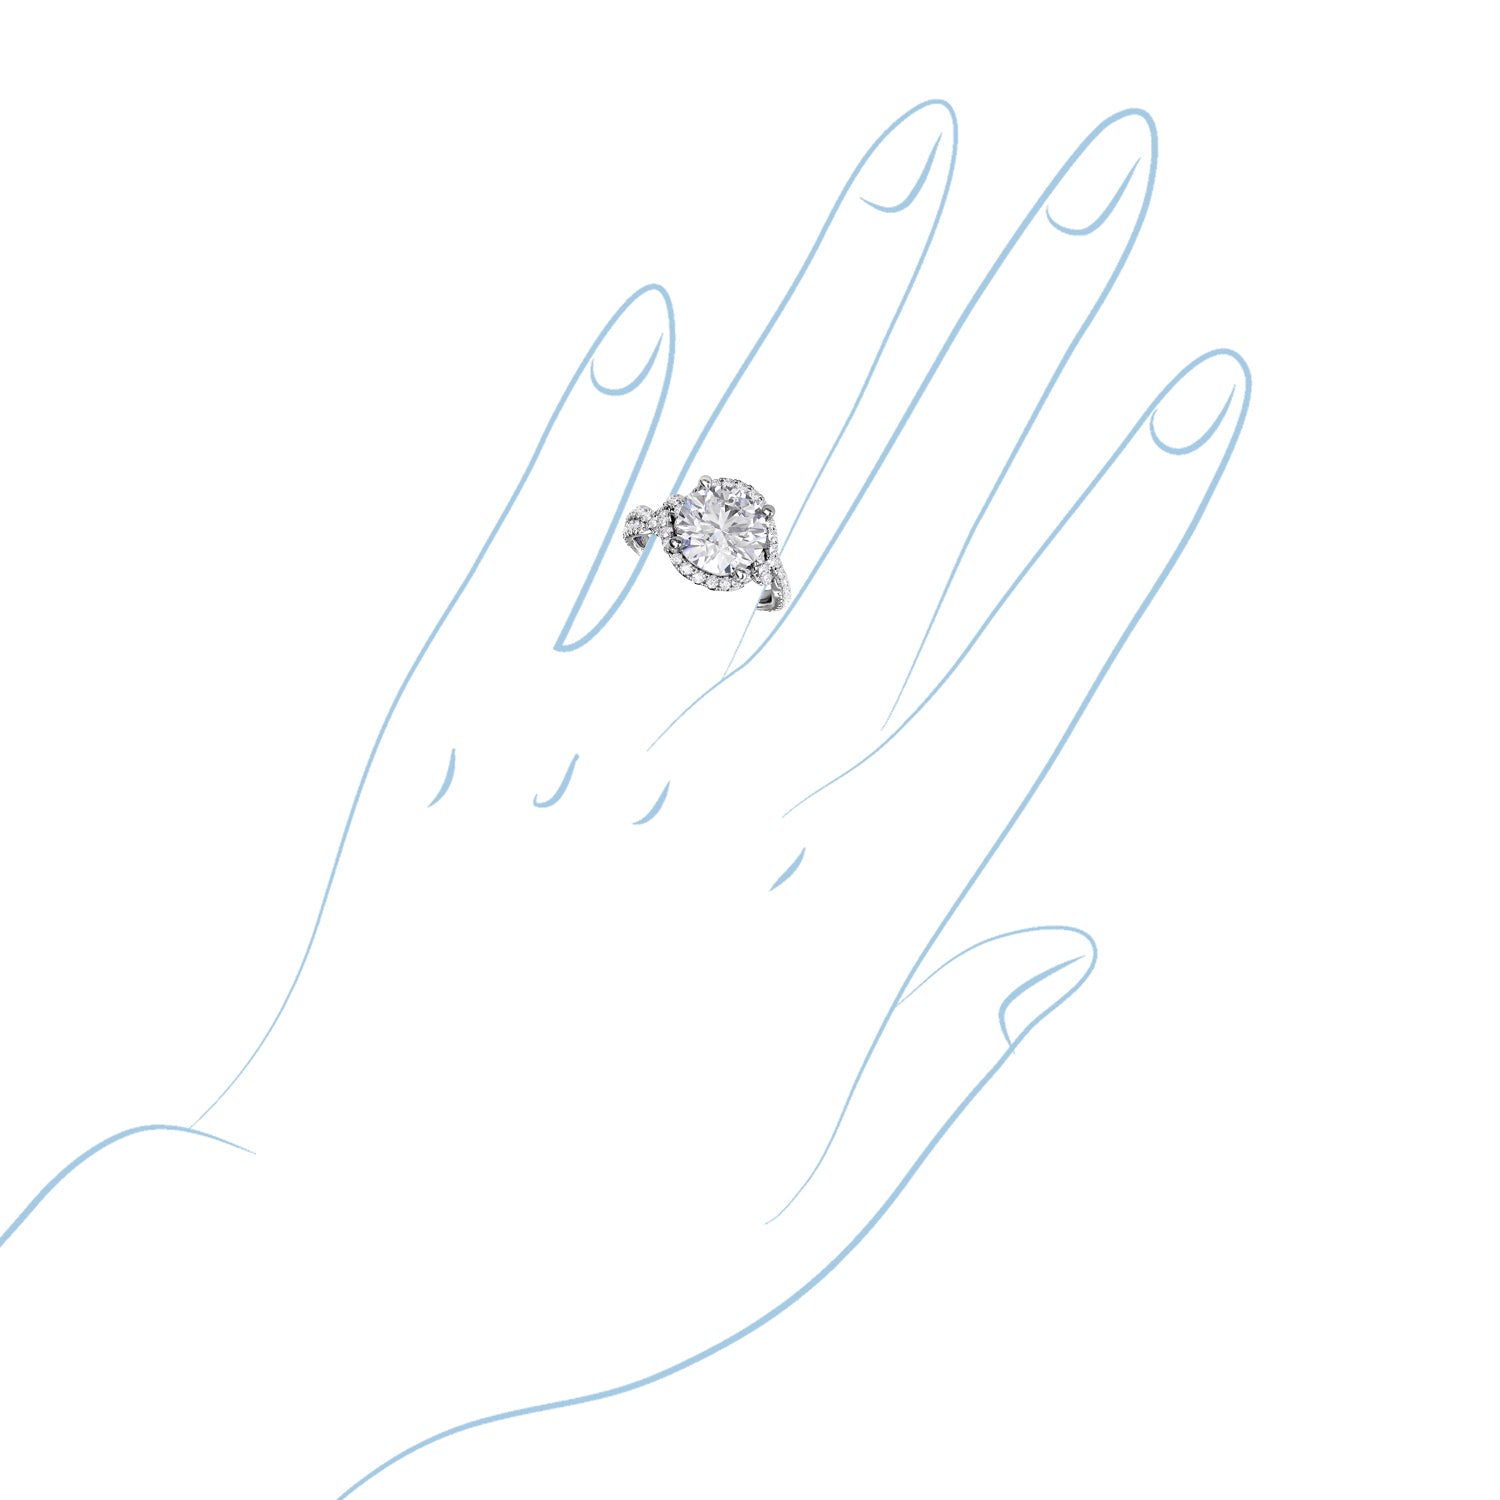 Fana Contemporary Round Diamond Halo Engagement Ring Setting With Twisted Shank in 14kt White Gold (3/4ct tw)